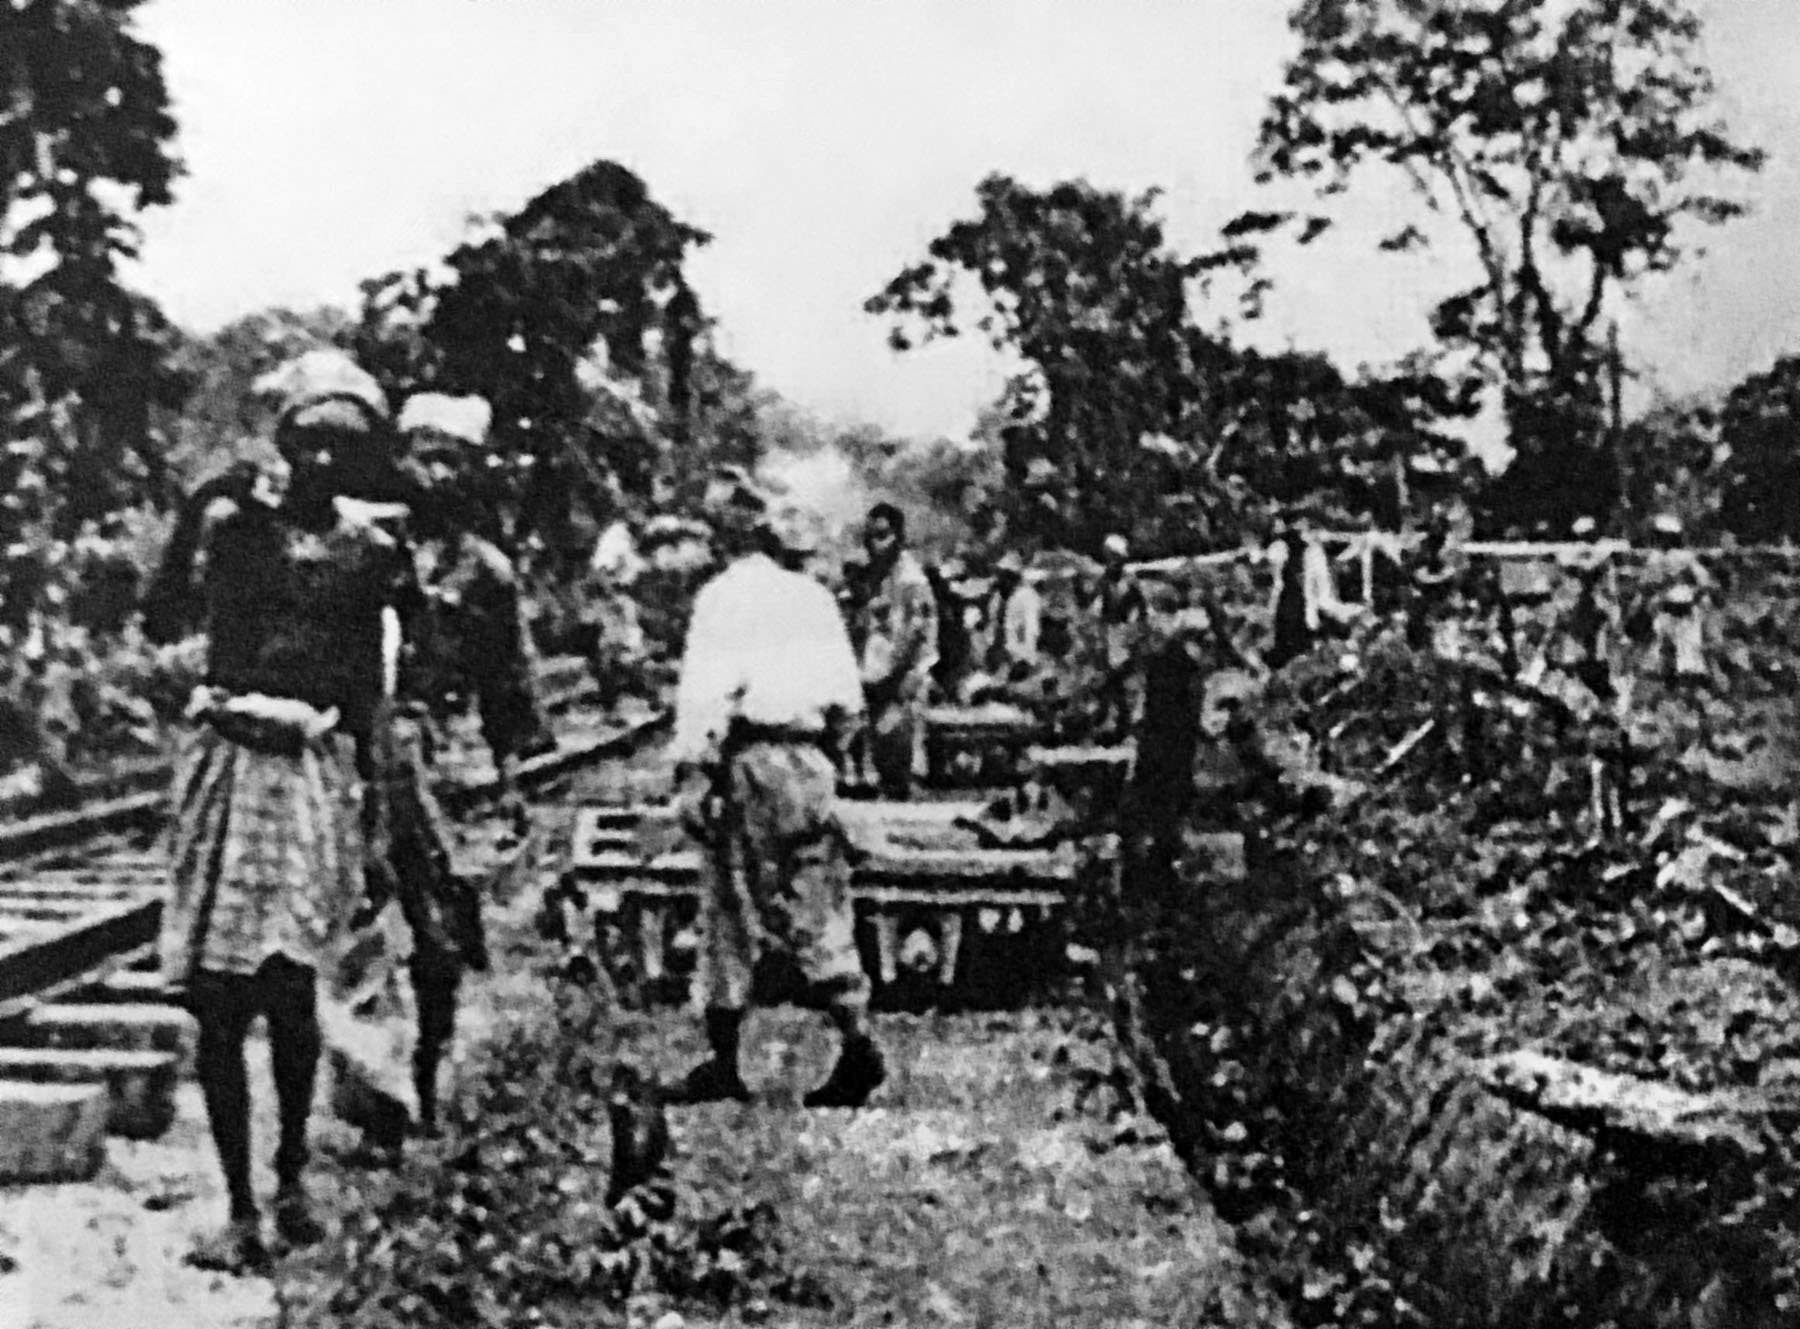 Malaysian natives known as Tamils were also conscripted by the Japanese to construct the railway. 